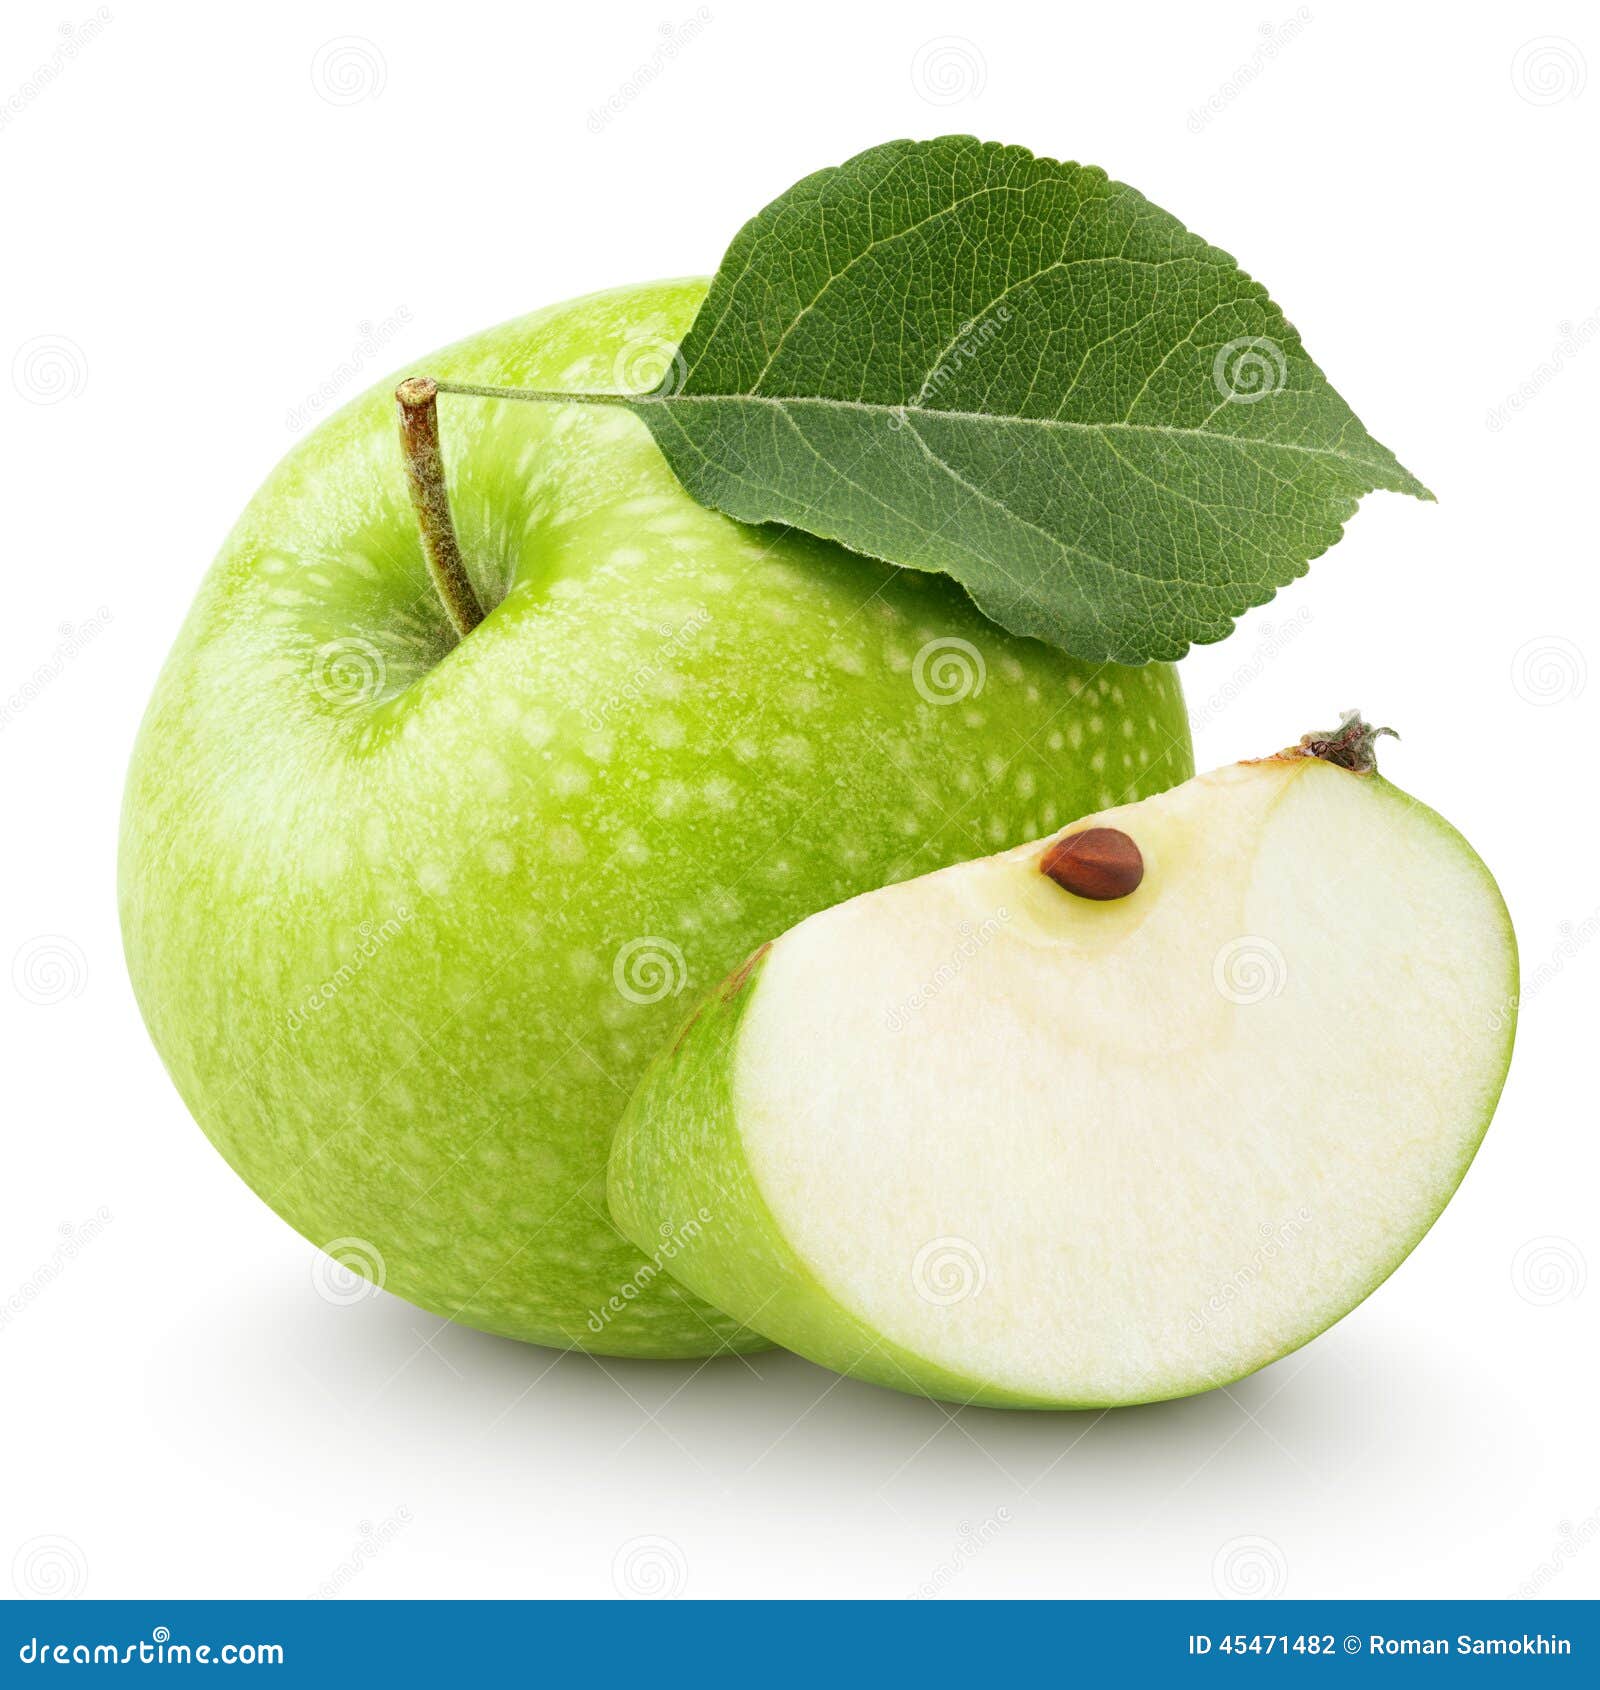 green apple with leaf and slice  on a white